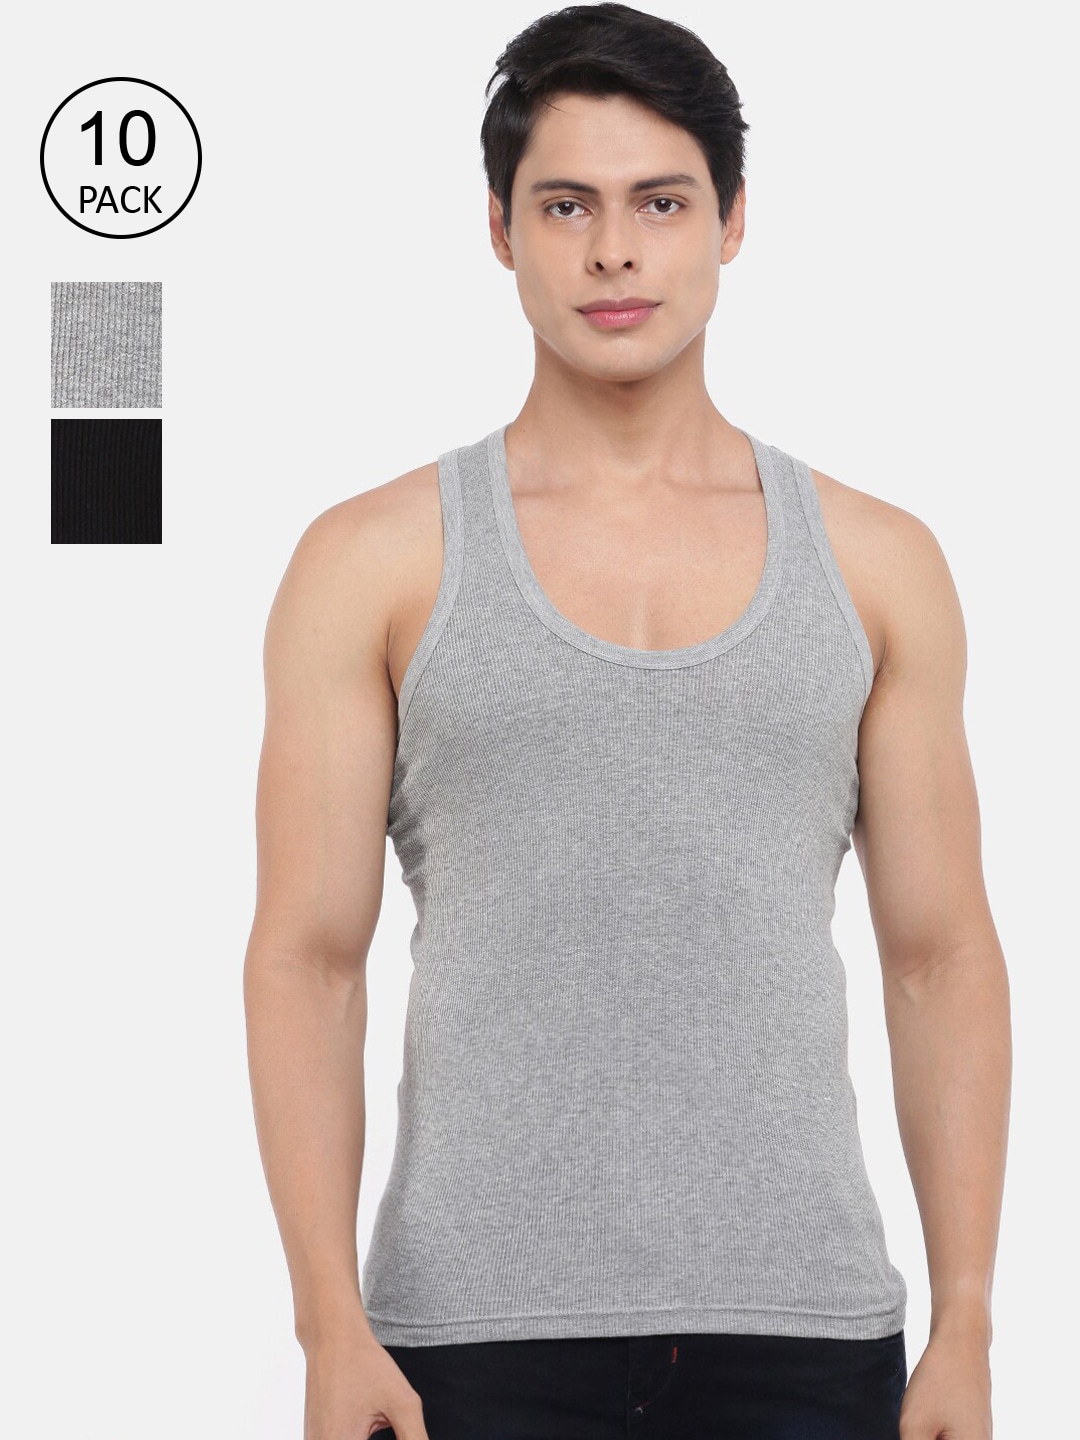 Clothing Innerwear Vests | Dollar Bigboss Men Pack of 10 Solid Basic Pure Cotton Innerwear Vests MBVE-06-R2-DERBY-GM-BLK-PO10 - AX41483